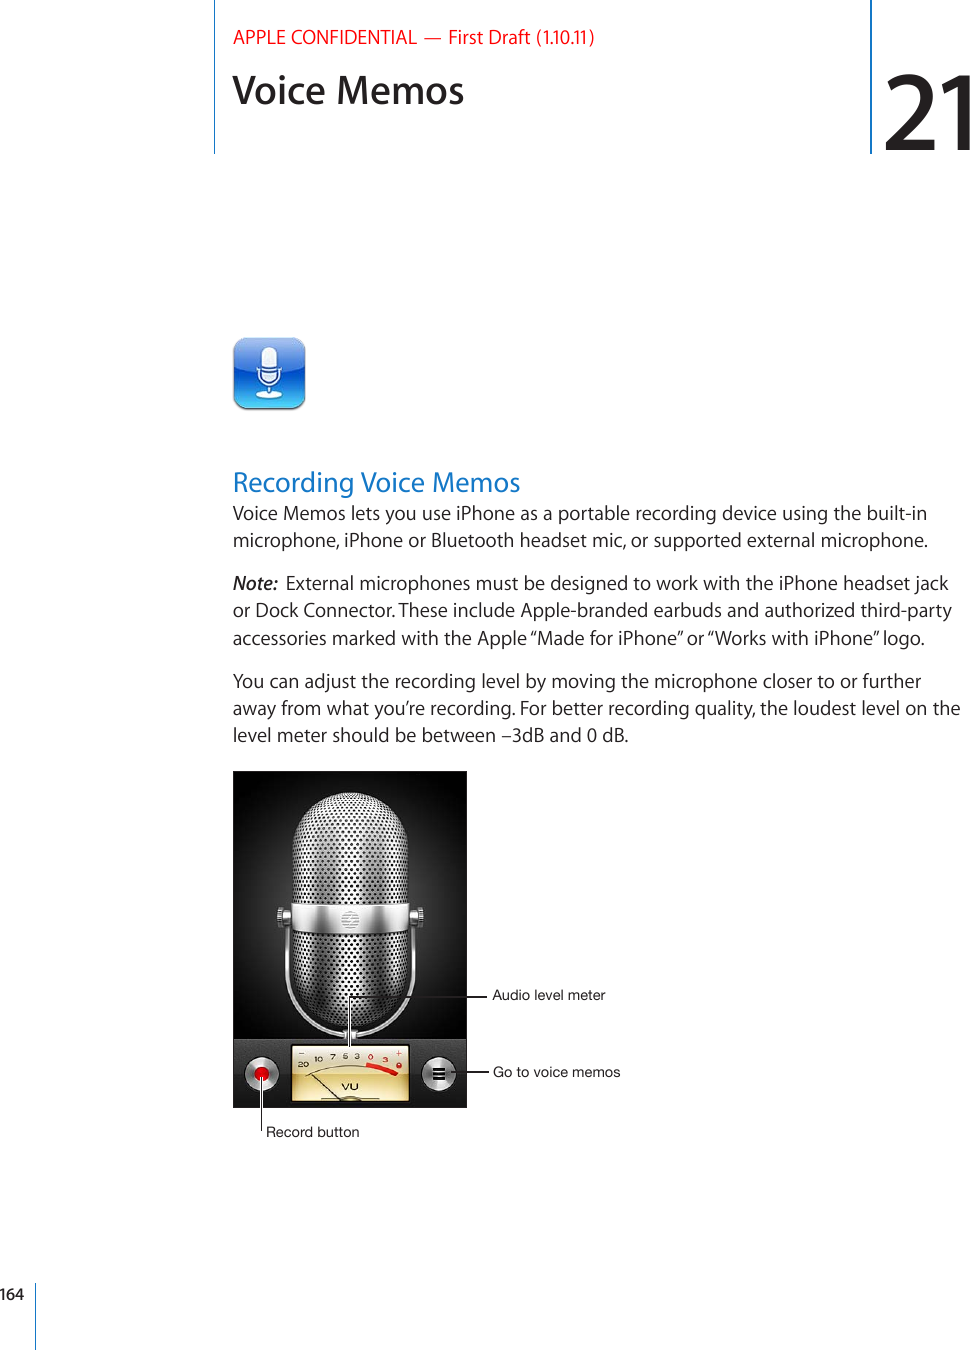 Voice Memos 21APPLE CONFIDENTIAL — First Draft (1.10.11)Recording Voice MemosVoice Memos lets you use iPhone as a portable recording device using the built-in microphone, iPhone or Bluetooth headset mic, or supported external microphone.Note:  External microphones must be designed to work with the iPhone headset jack or Dock Connector. These include Apple-branded earbuds and authorized third-party accessories marked with the Apple “Made for iPhone” or “Works with iPhone” logo.You can adjust the recording level by moving the microphone closer to or further away from what you’re recording. For better recording quality, the loudest level on the level meter should be between –3dB and 0 dB.9LJVYKI\[[VU(\KPVSL]LSTL[LY.V[V]VPJLTLTVZ164